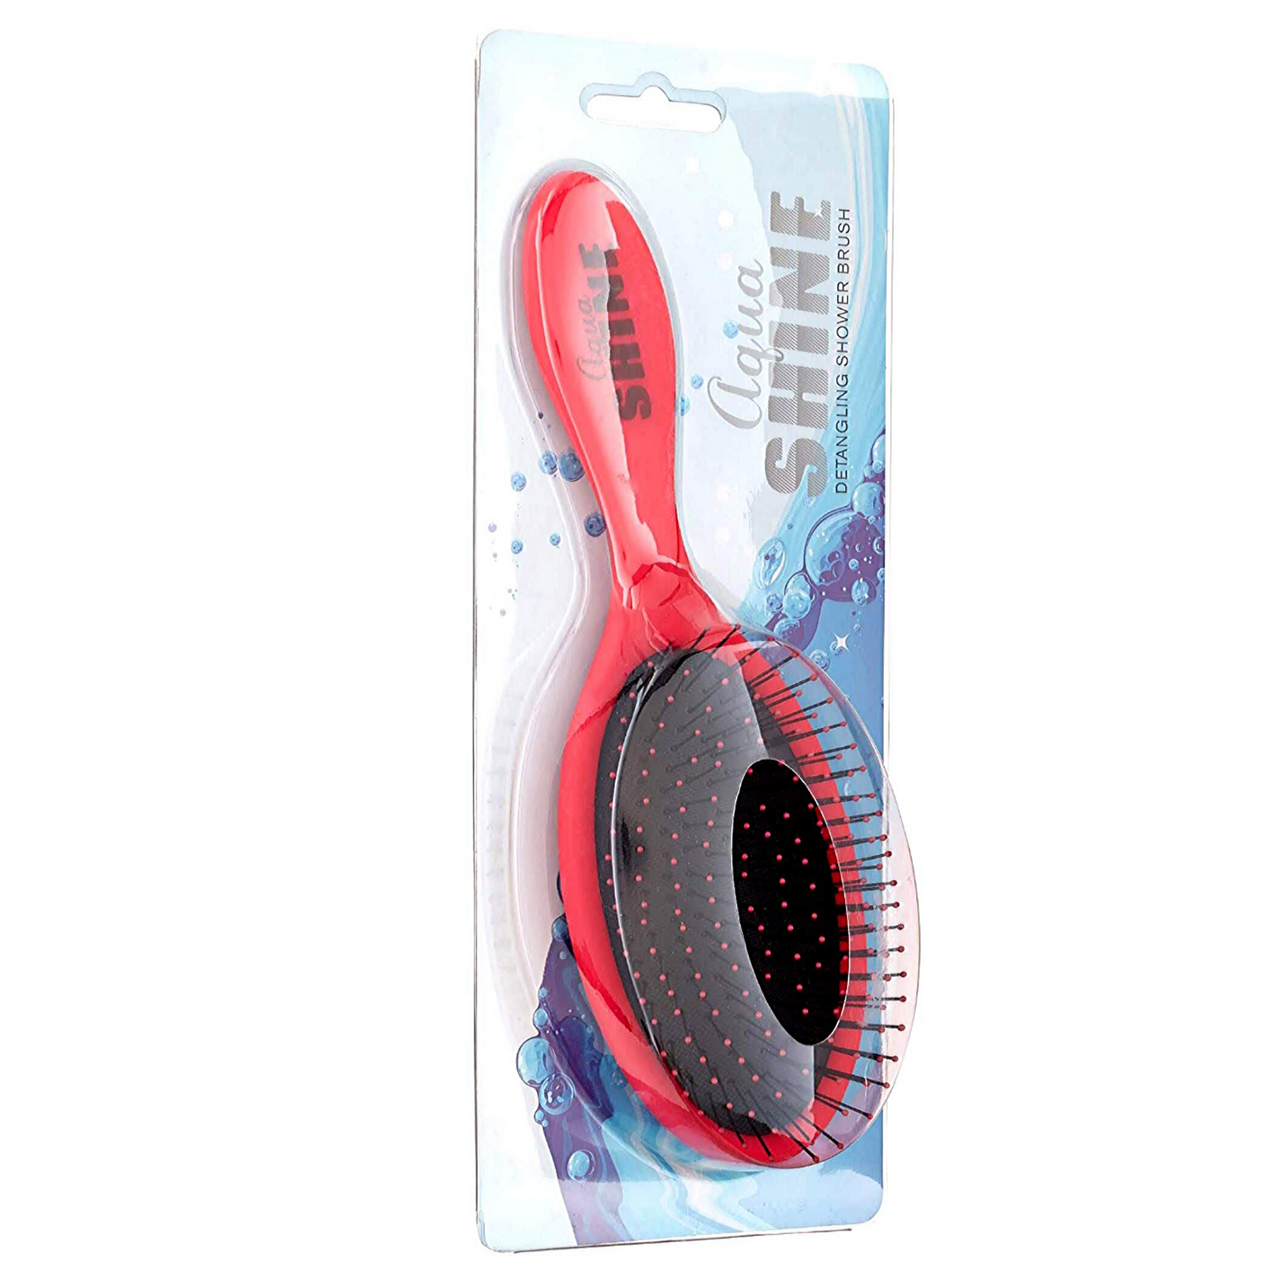 Wet Dry Brush Soft Flexible Bristles Detangles and Smooths with Ease - Pink